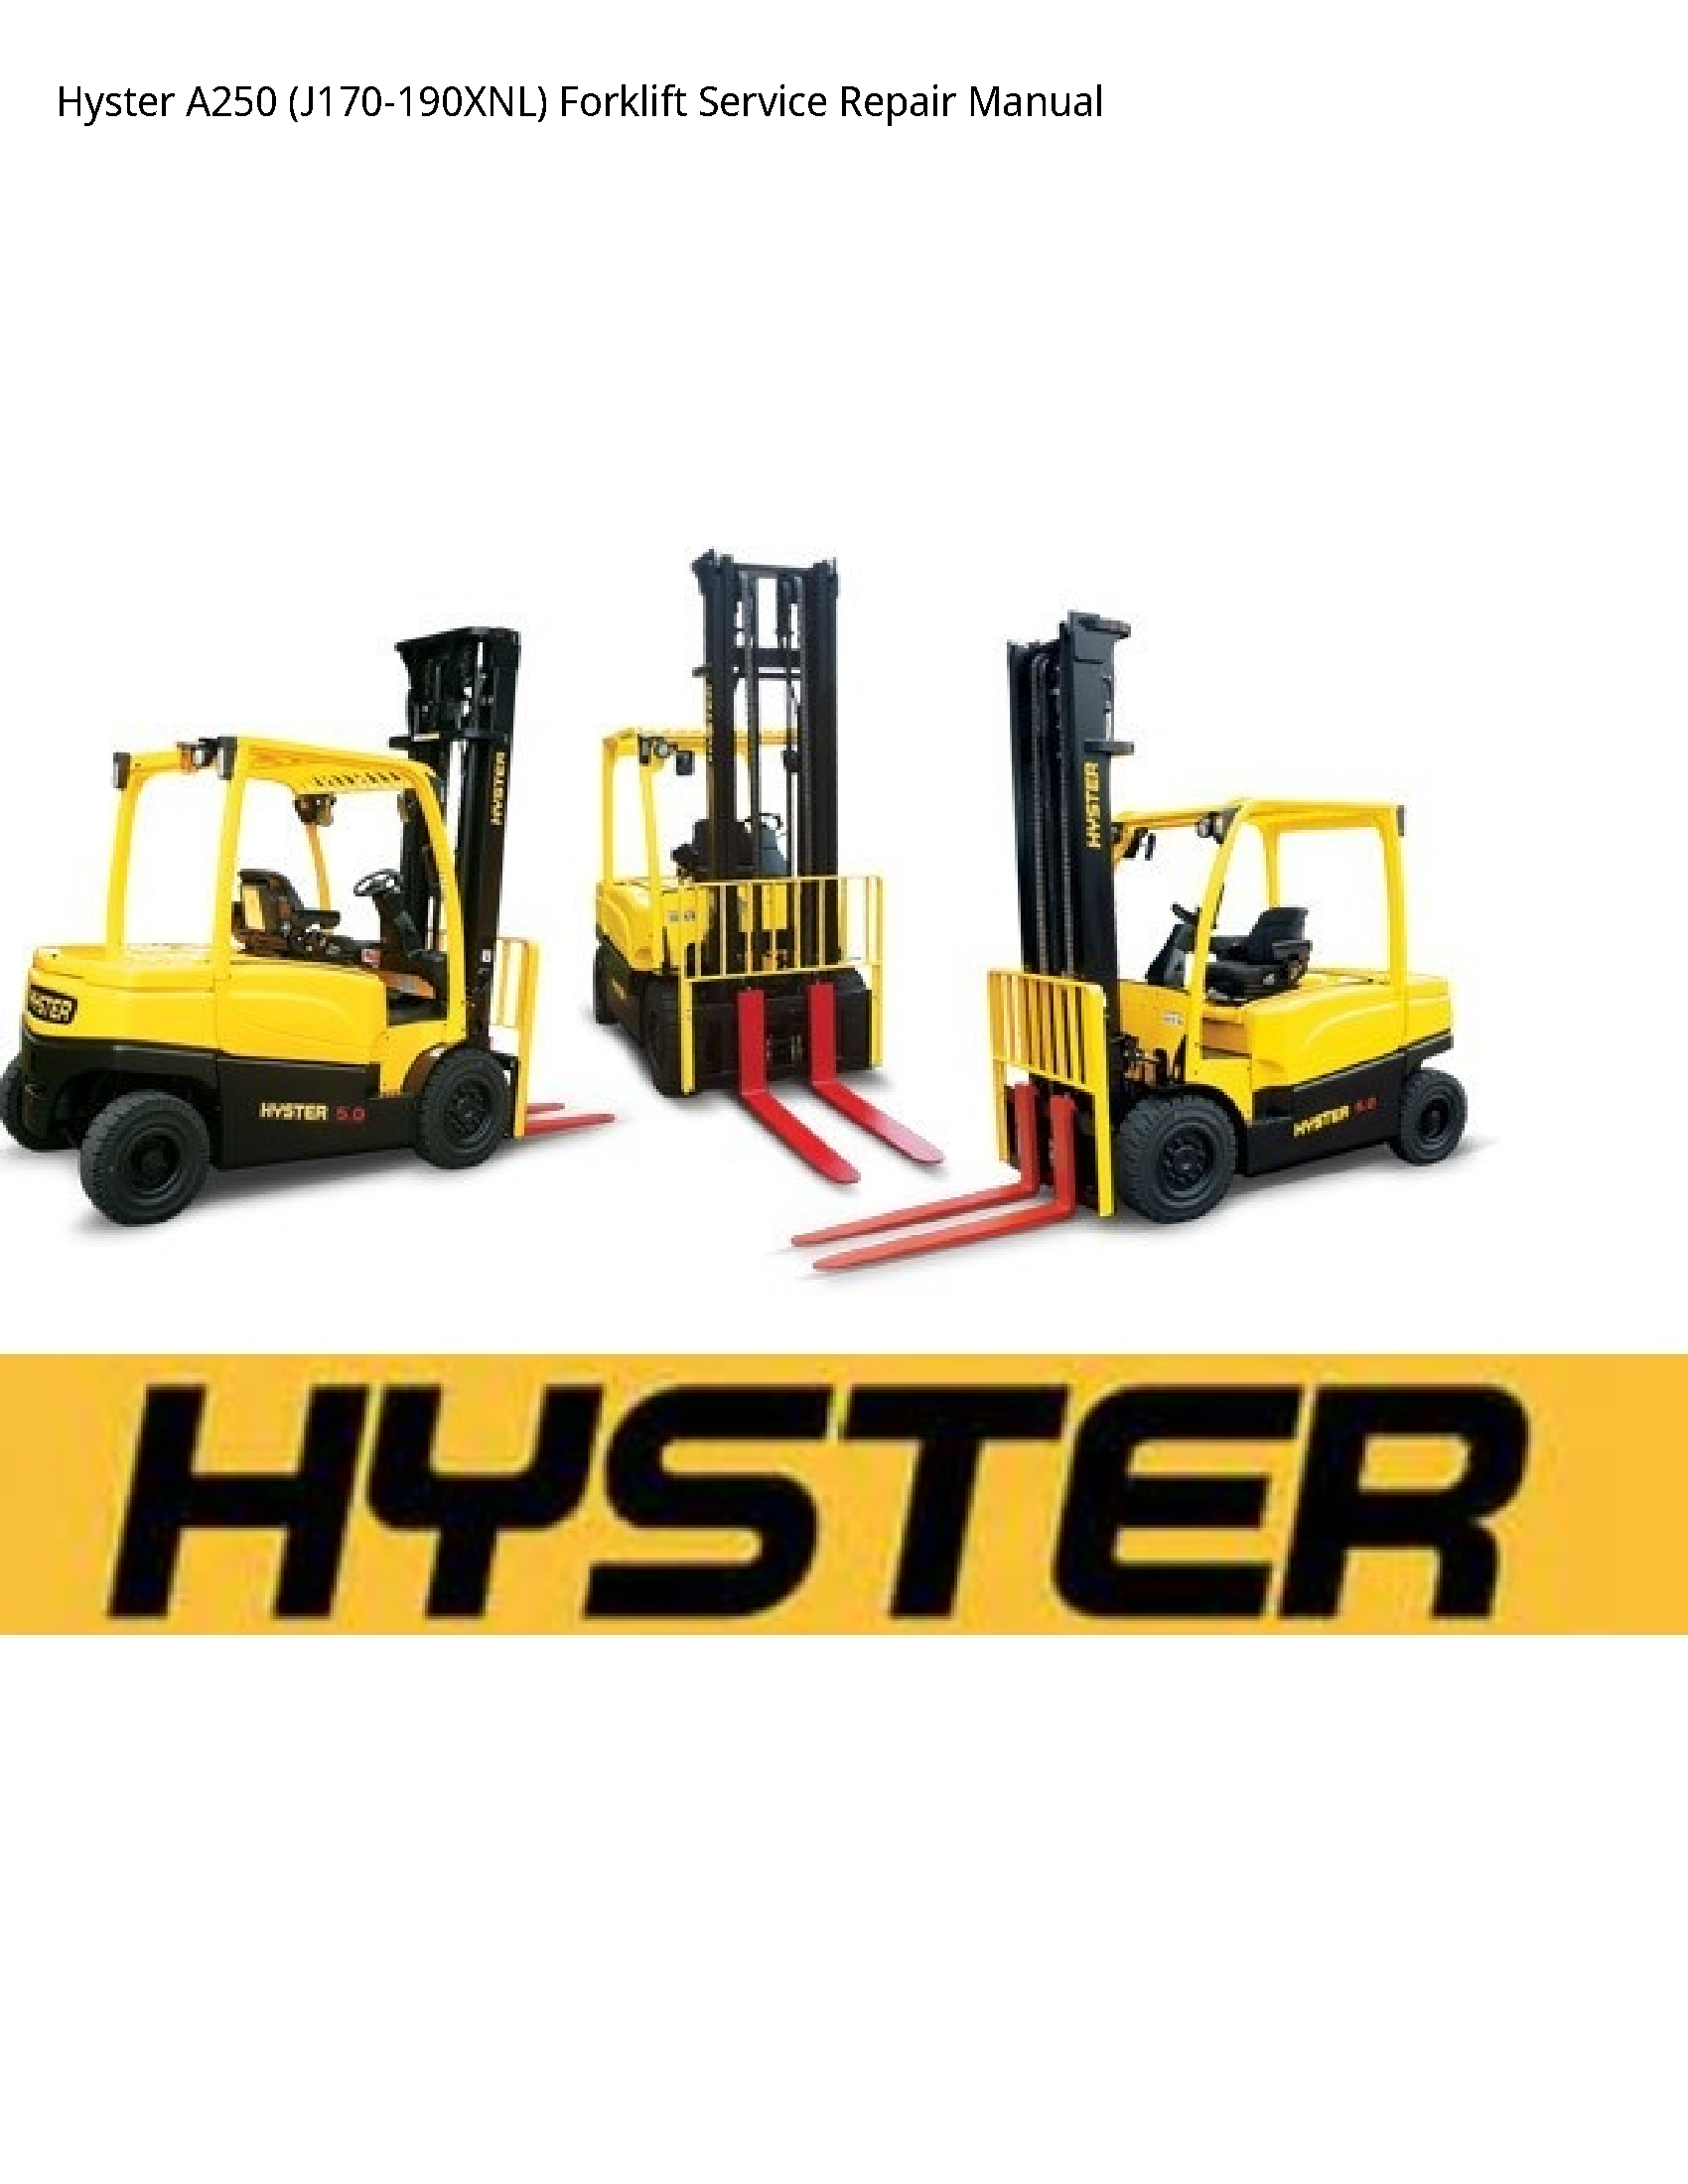 Hyster A250 Forklift manual